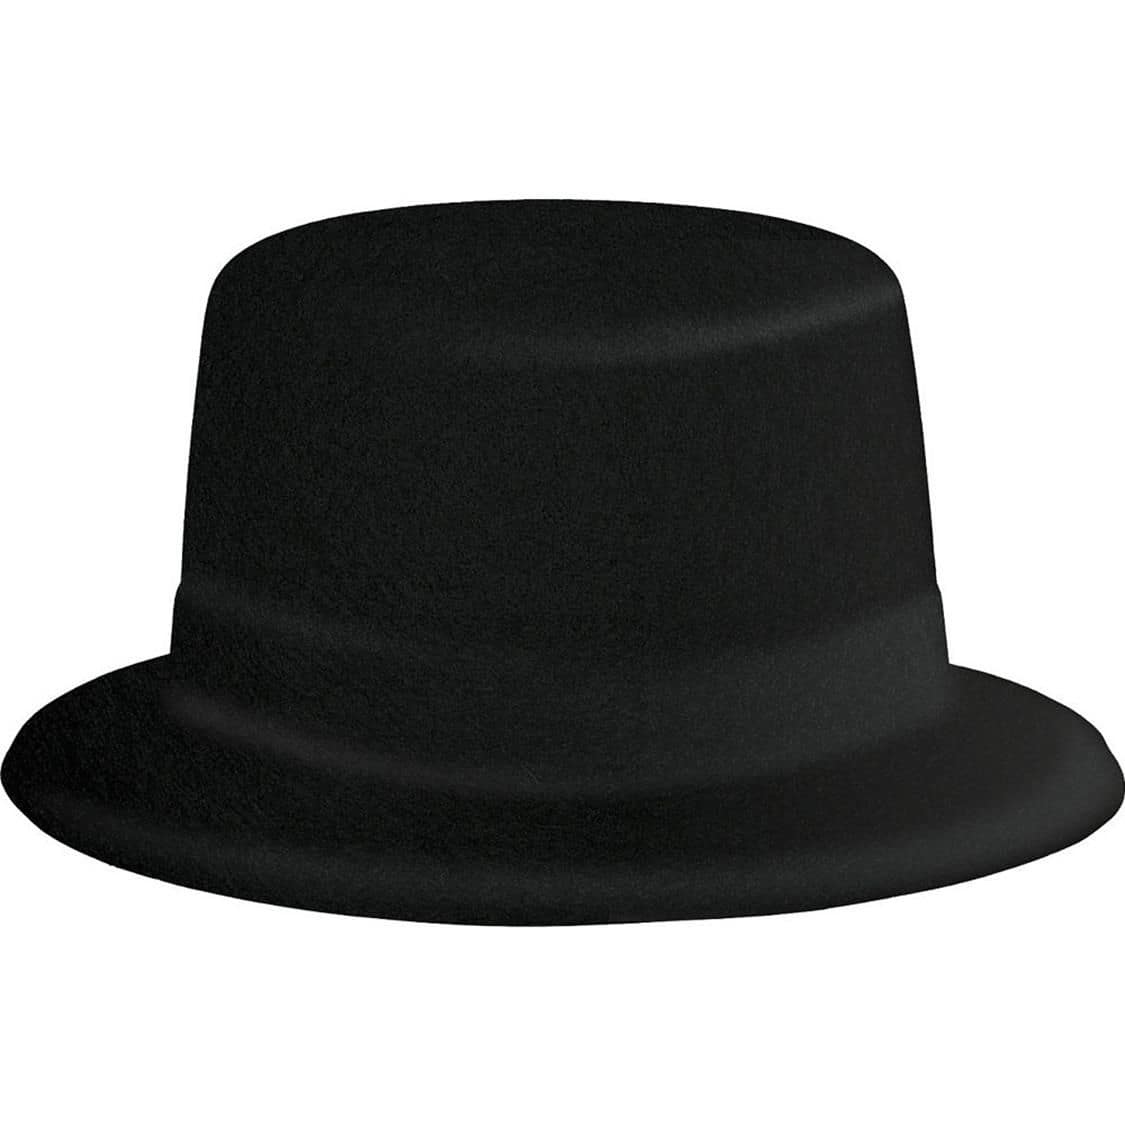 Top Hat, Black, One Size, Wearable Costume Accessory for Halloween